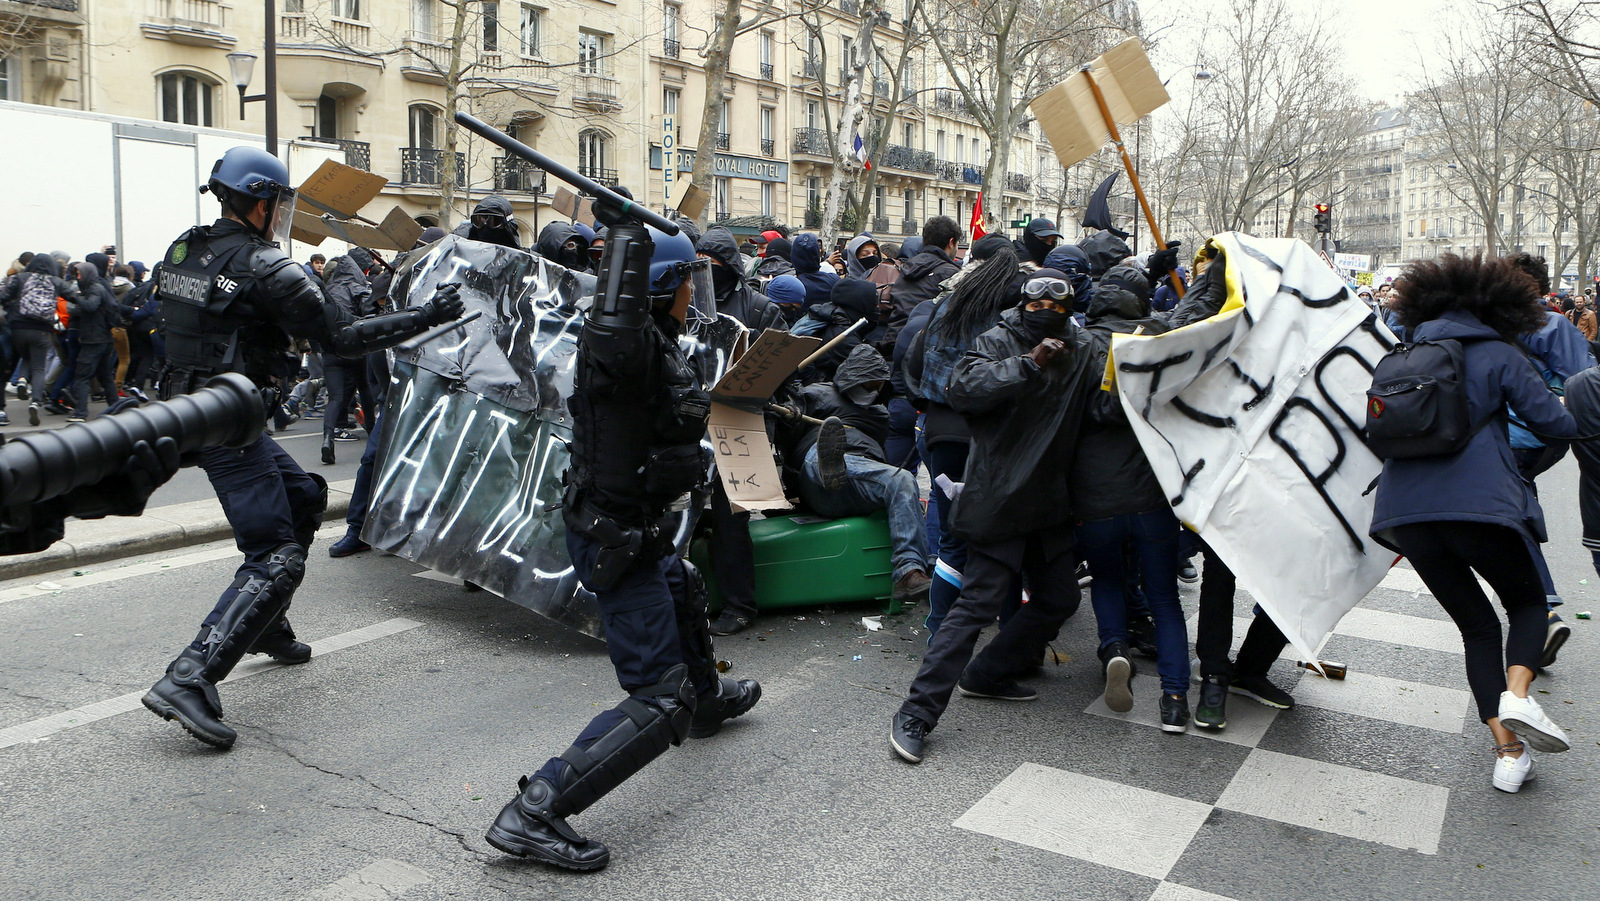 Youths clash with riot police officers during a high school students demonstration against a labor reform, in Paris, Thursday, March 24, 2016. France's Socialist government is due to formally present a contested labor reform that aims to amend the 35-hour workweek and relax other labor rules. (AP Photo/Francois Mori)